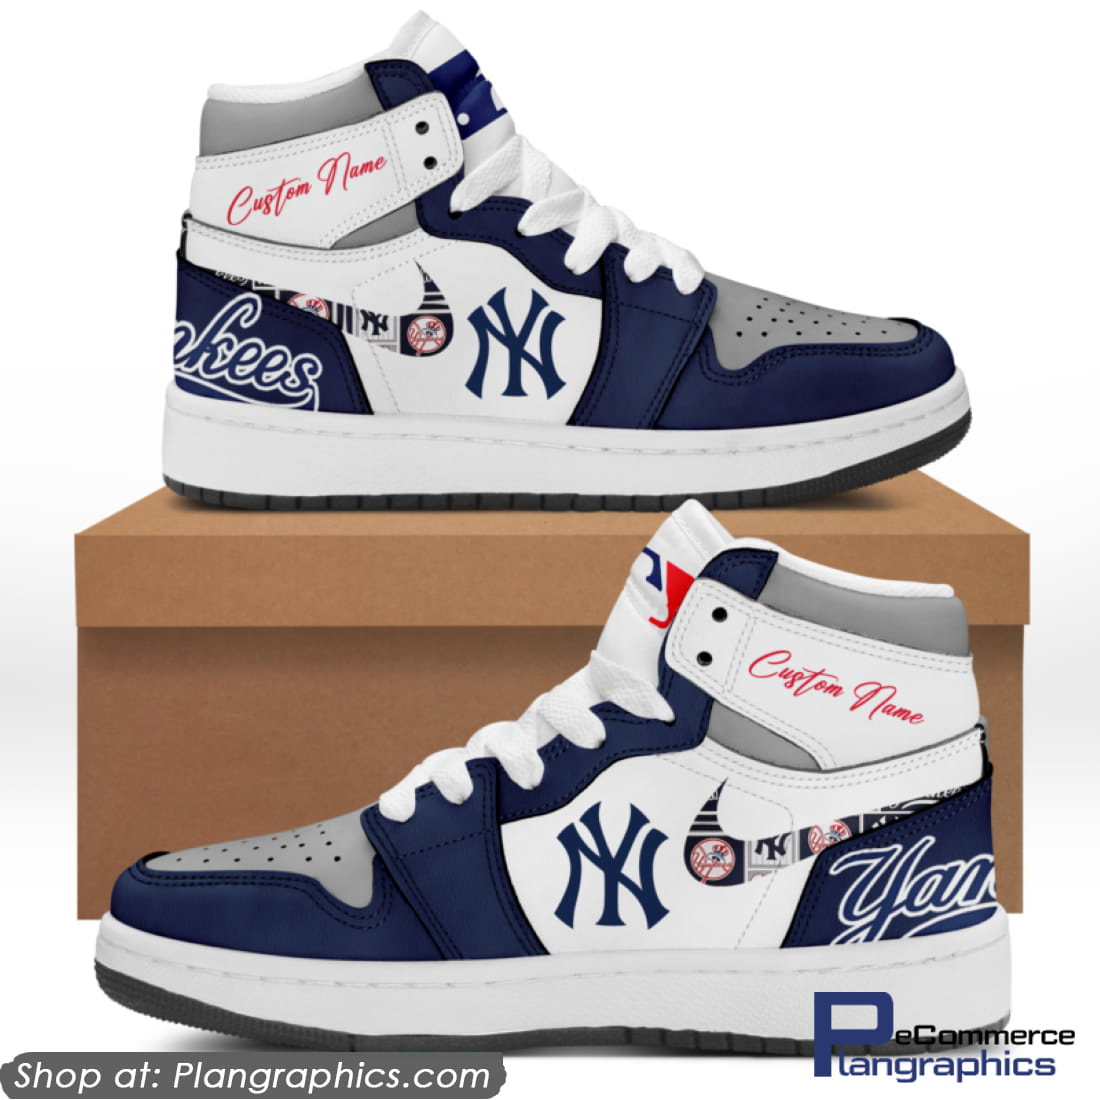 Personalized MLB Shoes for fans Air Jordan 1